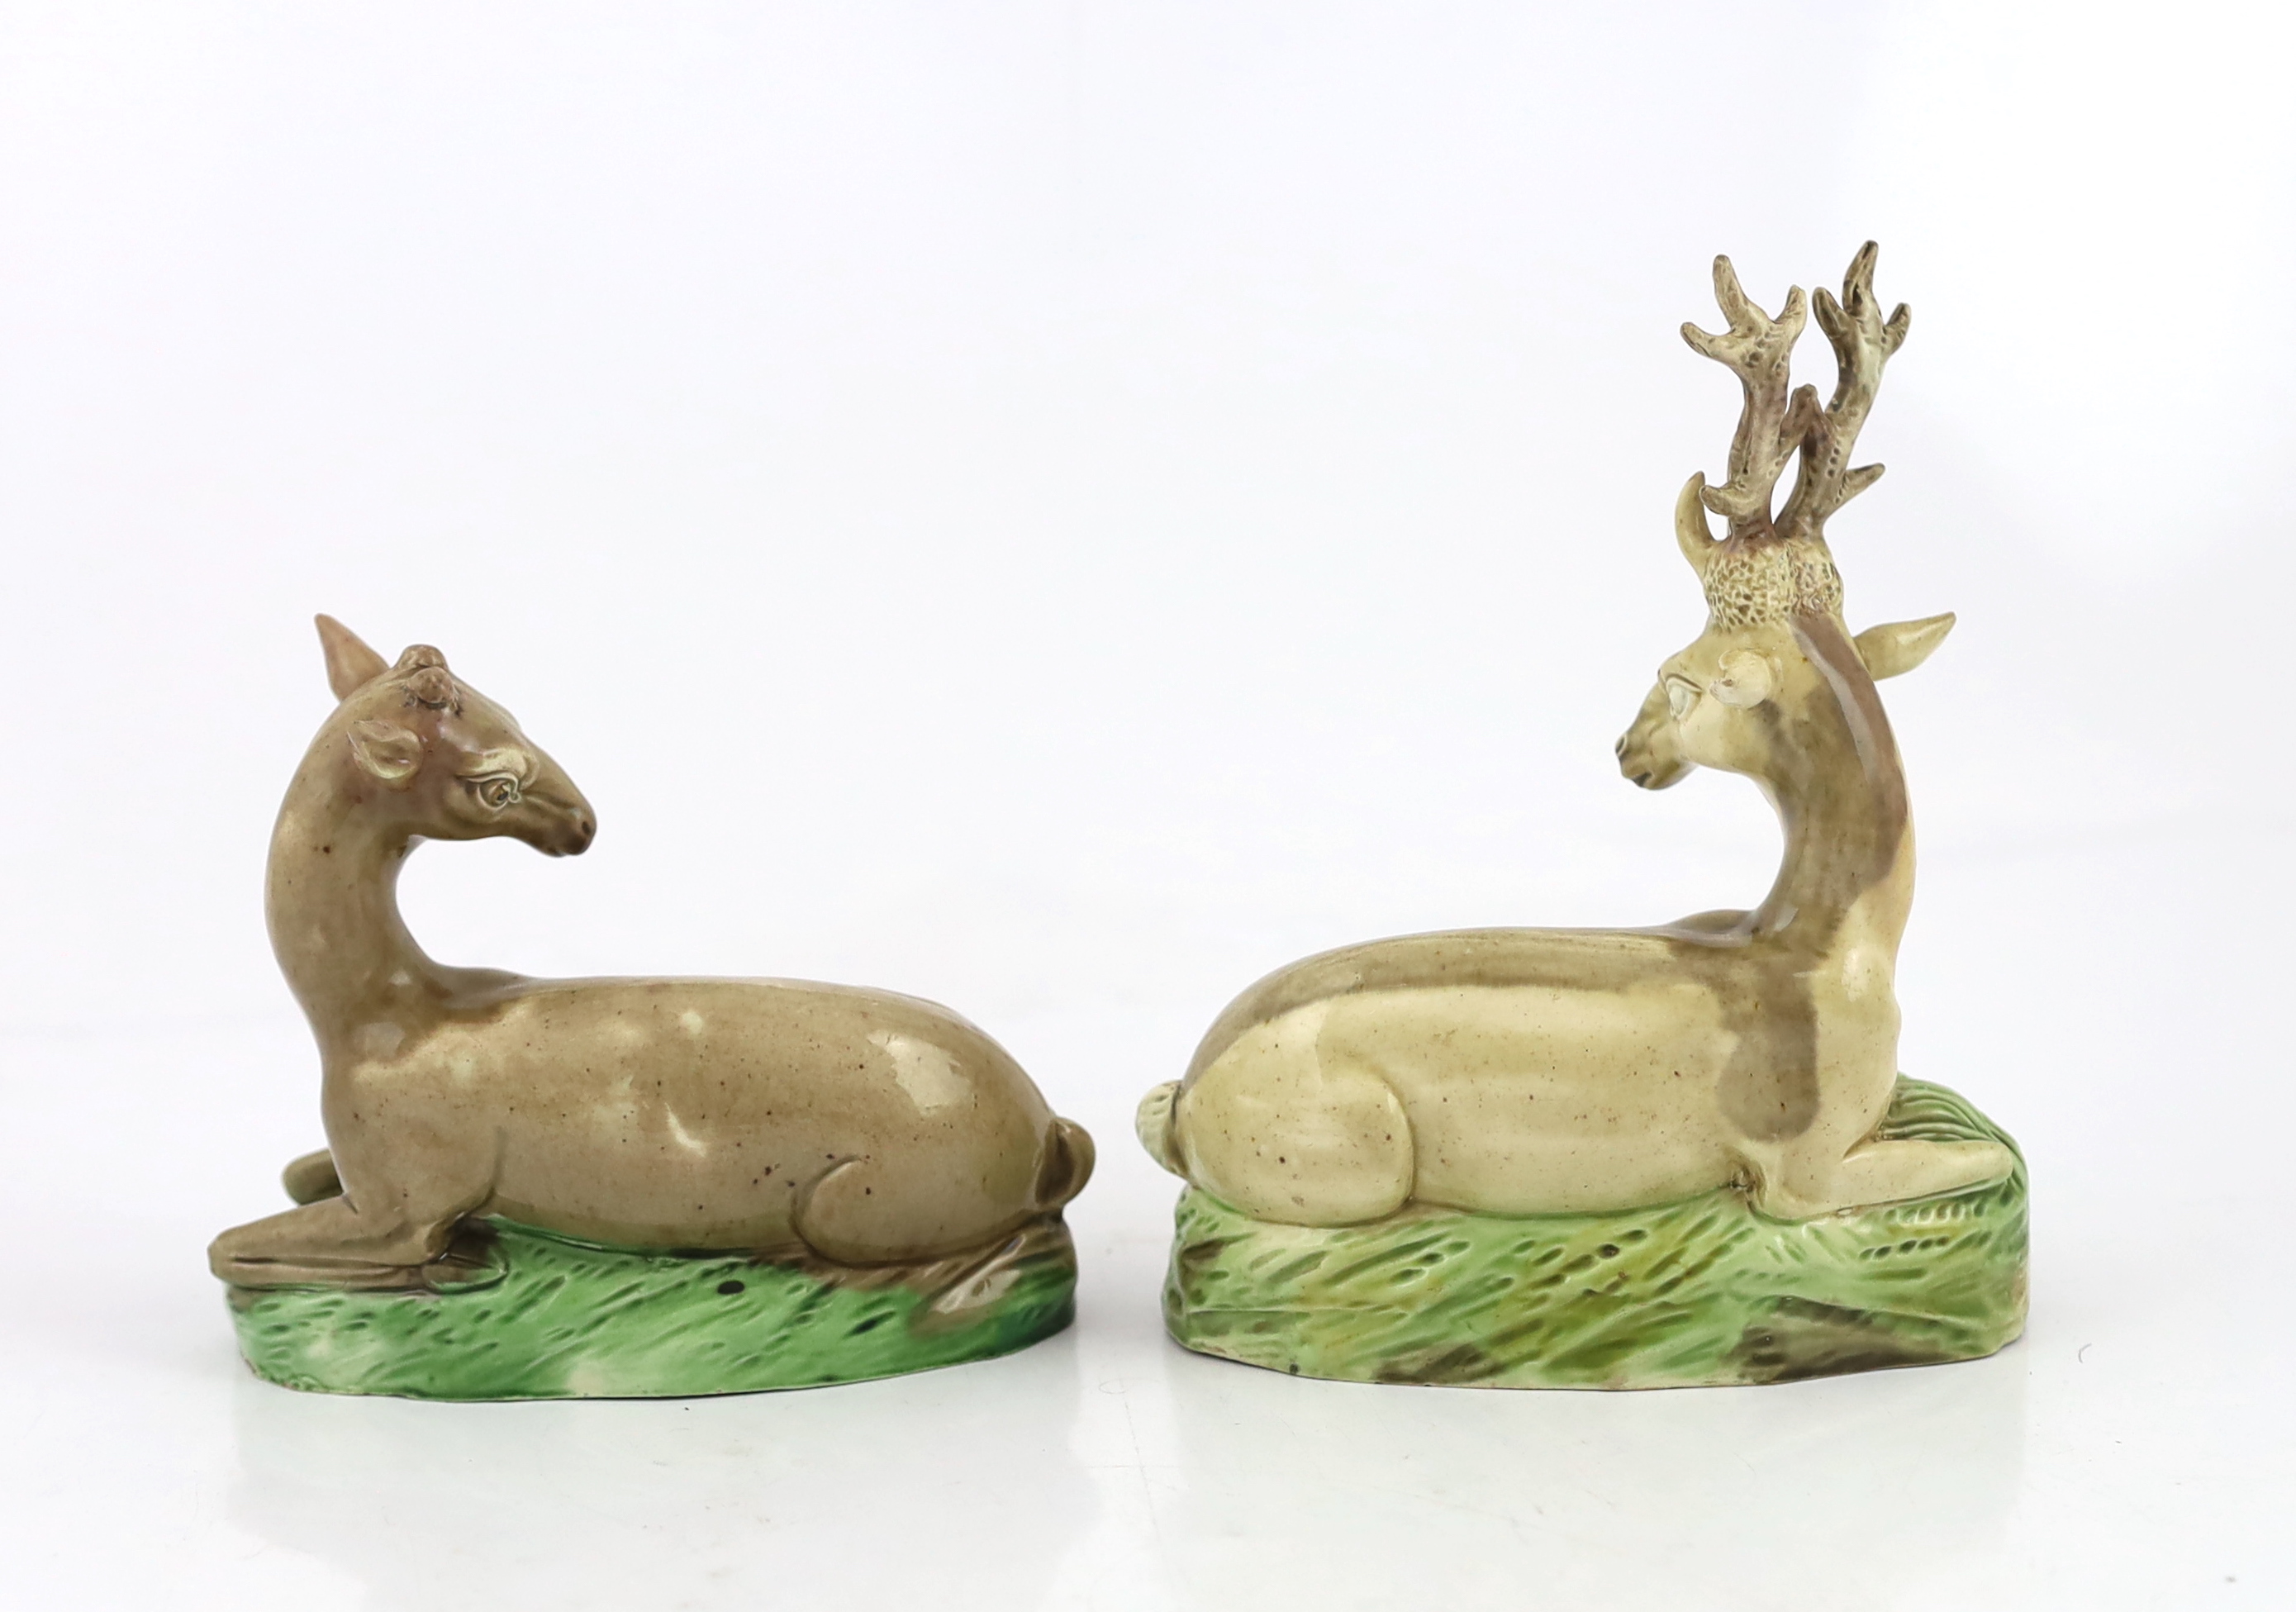 A near pair of Ralph Wood type figures of a Stag and Hind, c.1790, some restoration